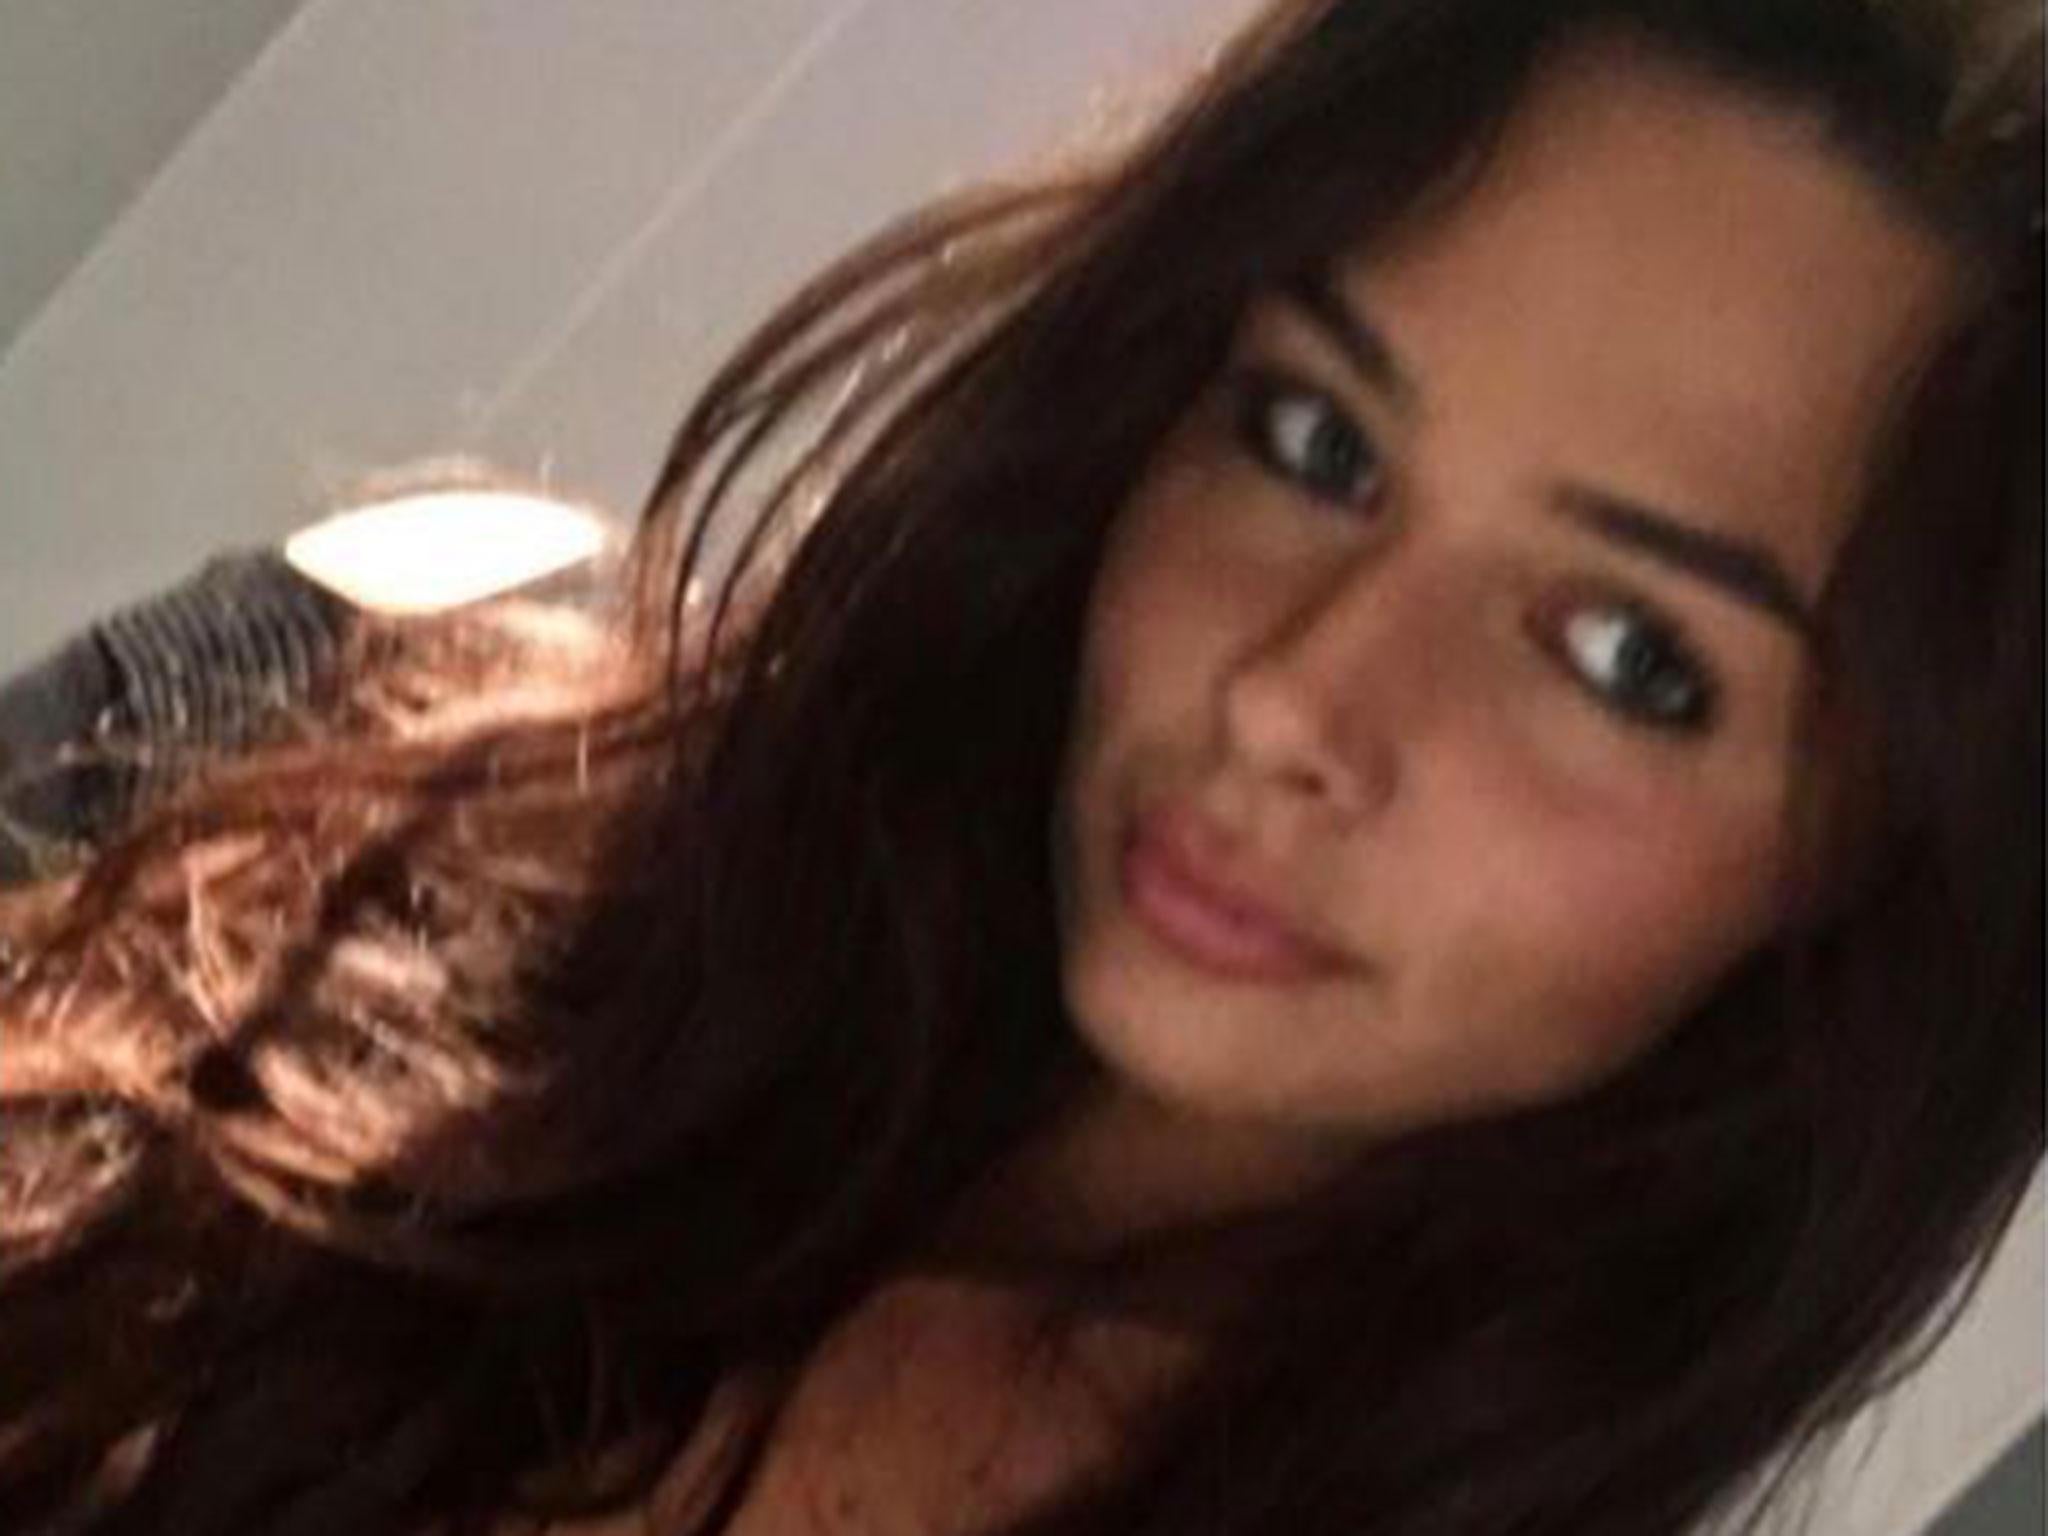 Mary Kate Heys, 20, from Manchester, said she was woken up by the 22-year-old Swedish man who appeared to be in a 'manic state'